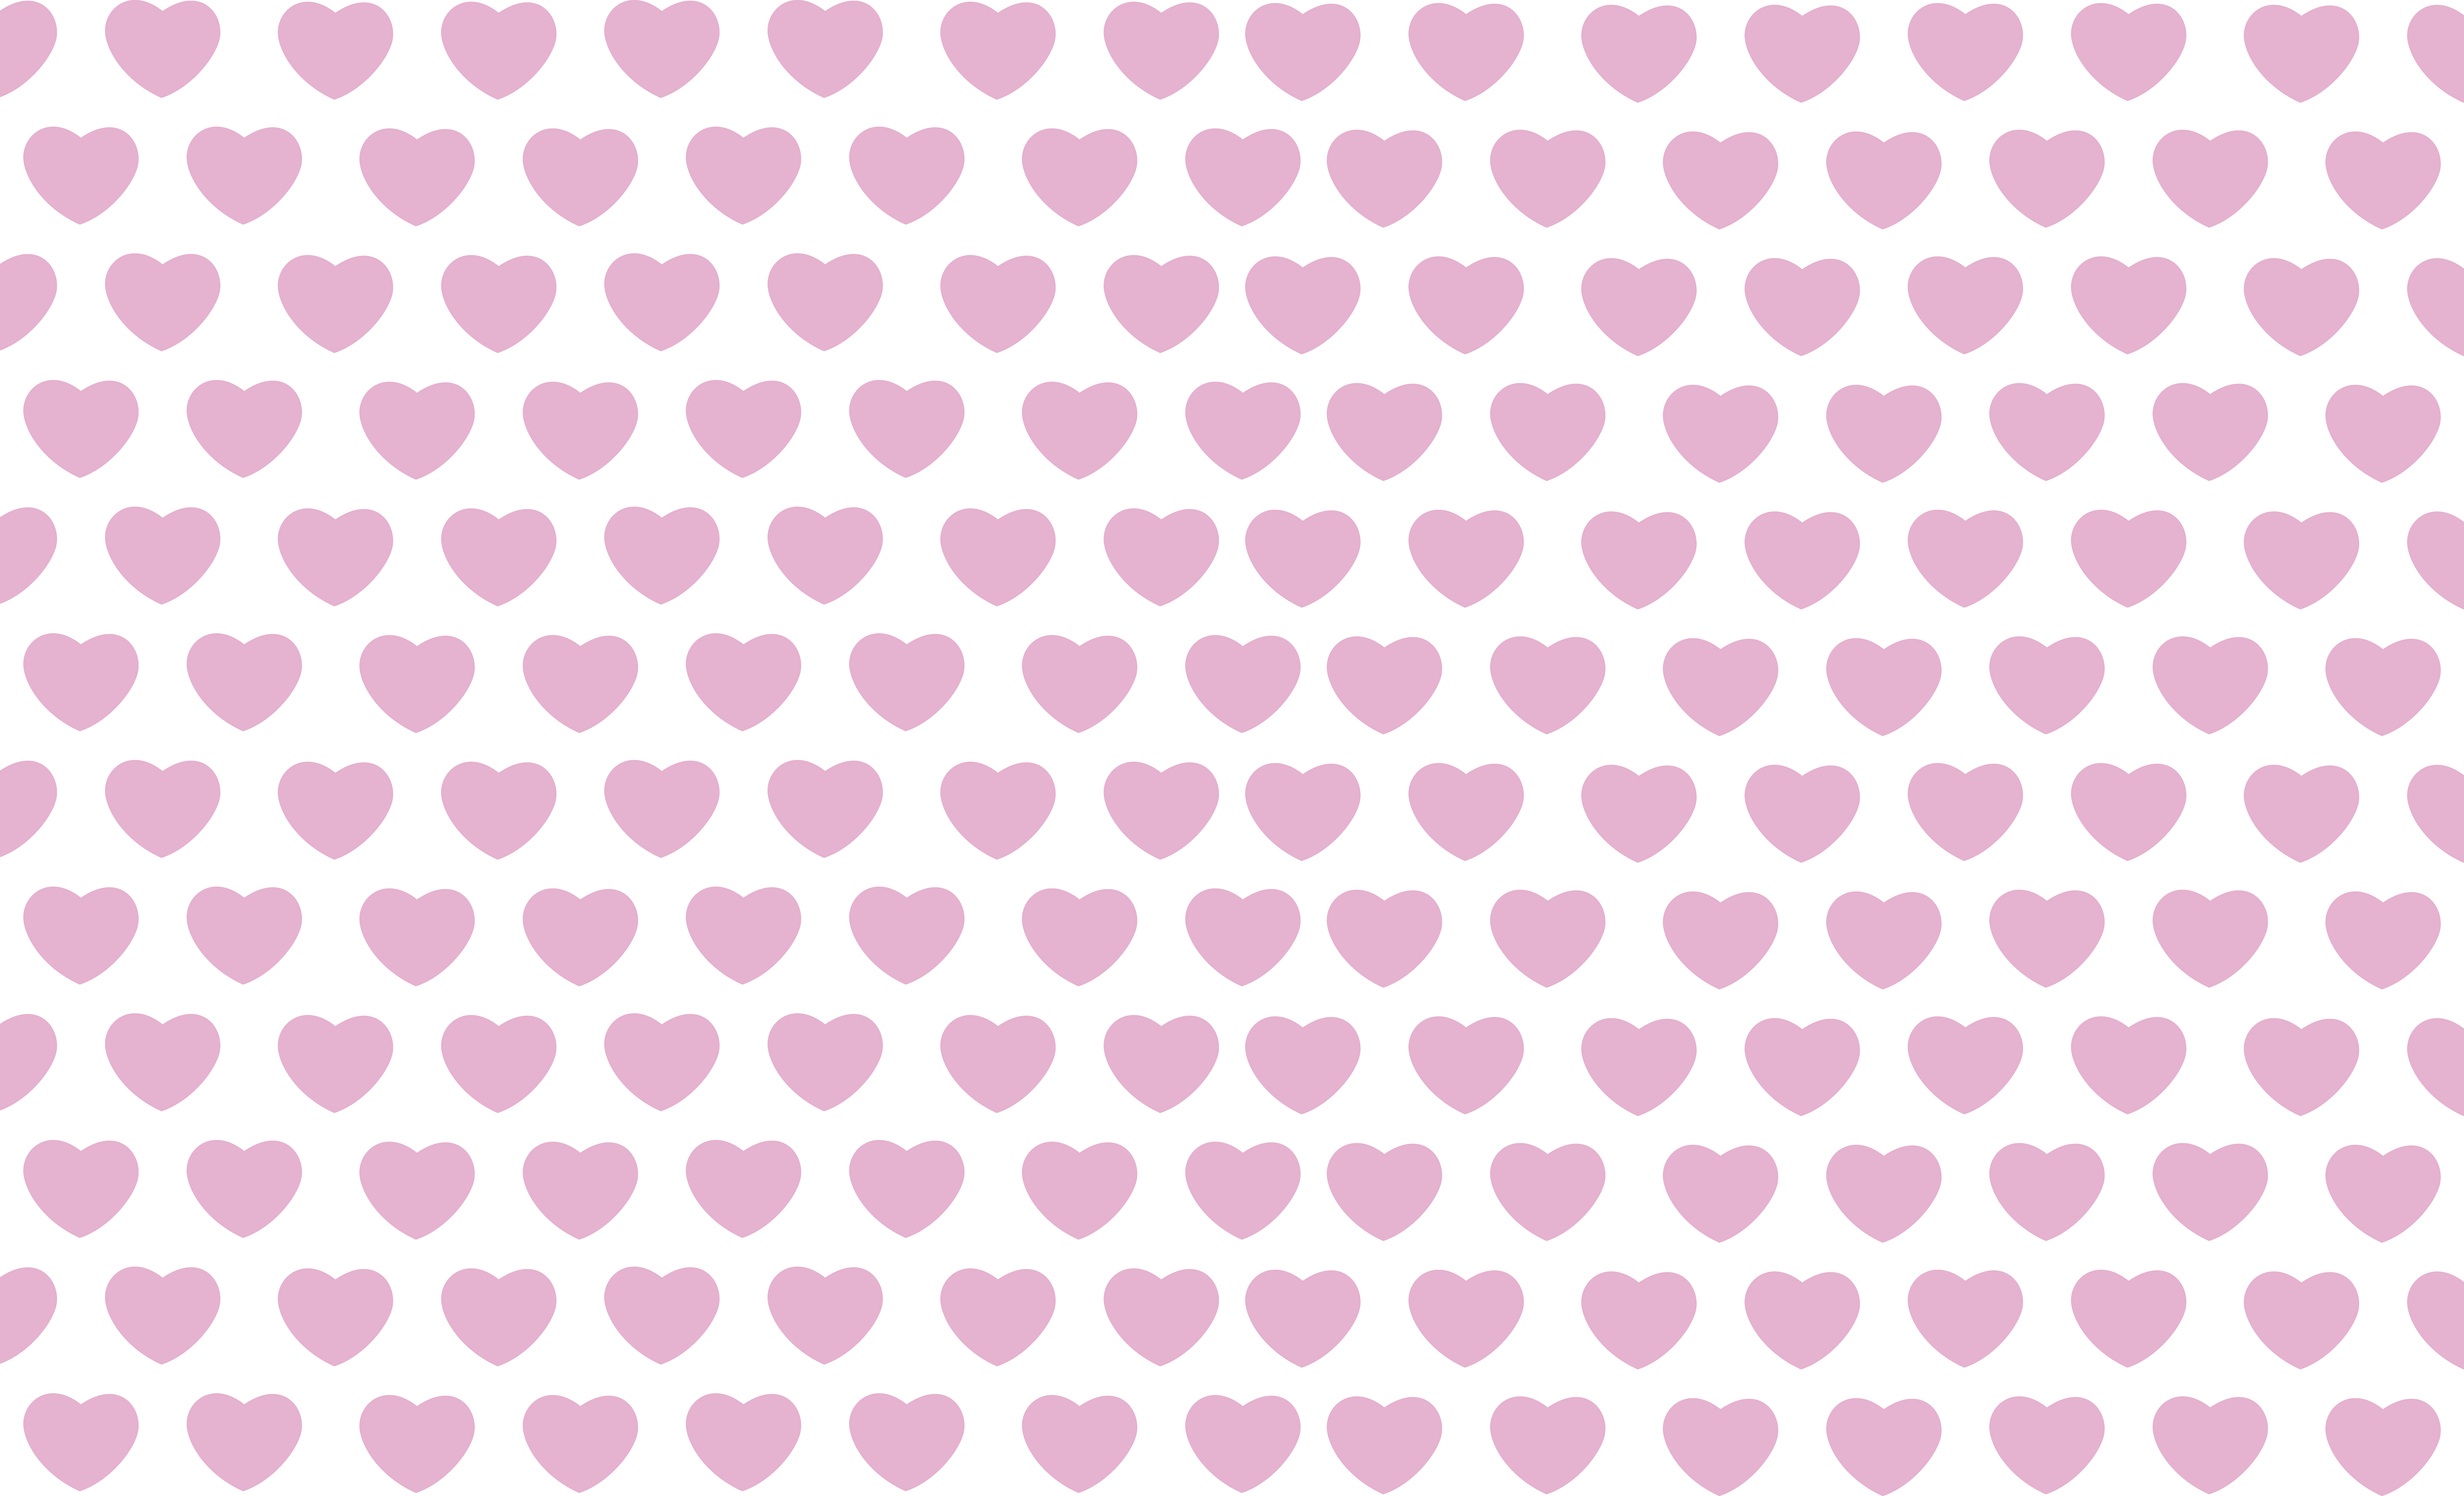 Hearts for background.